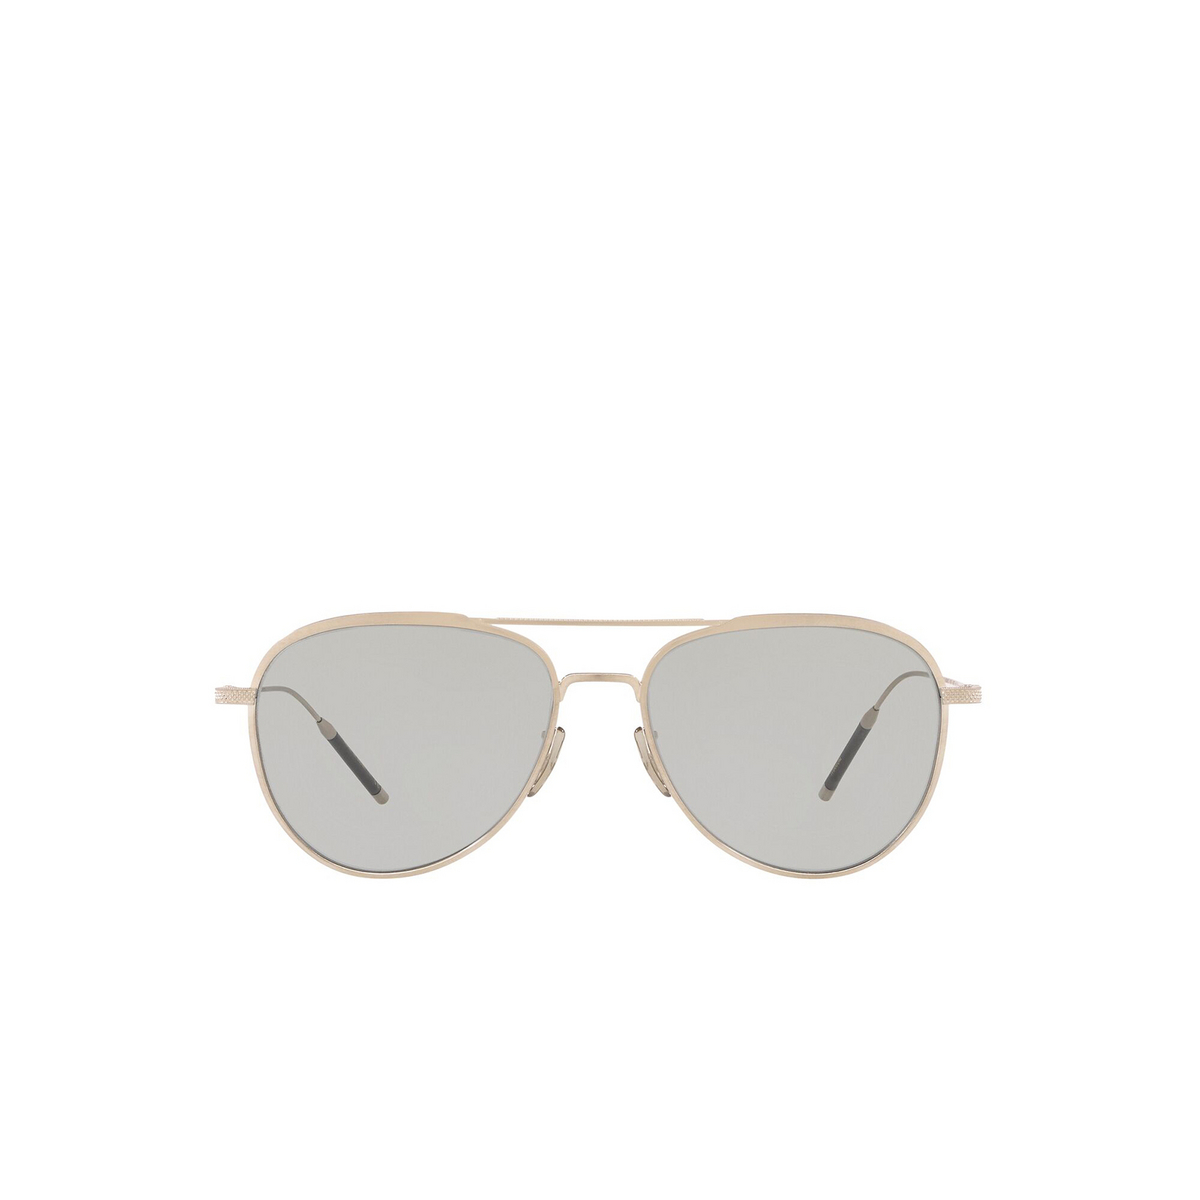 Oliver Peoples TK-3 Sunglasses 5254R5 Brushed Silver - front view